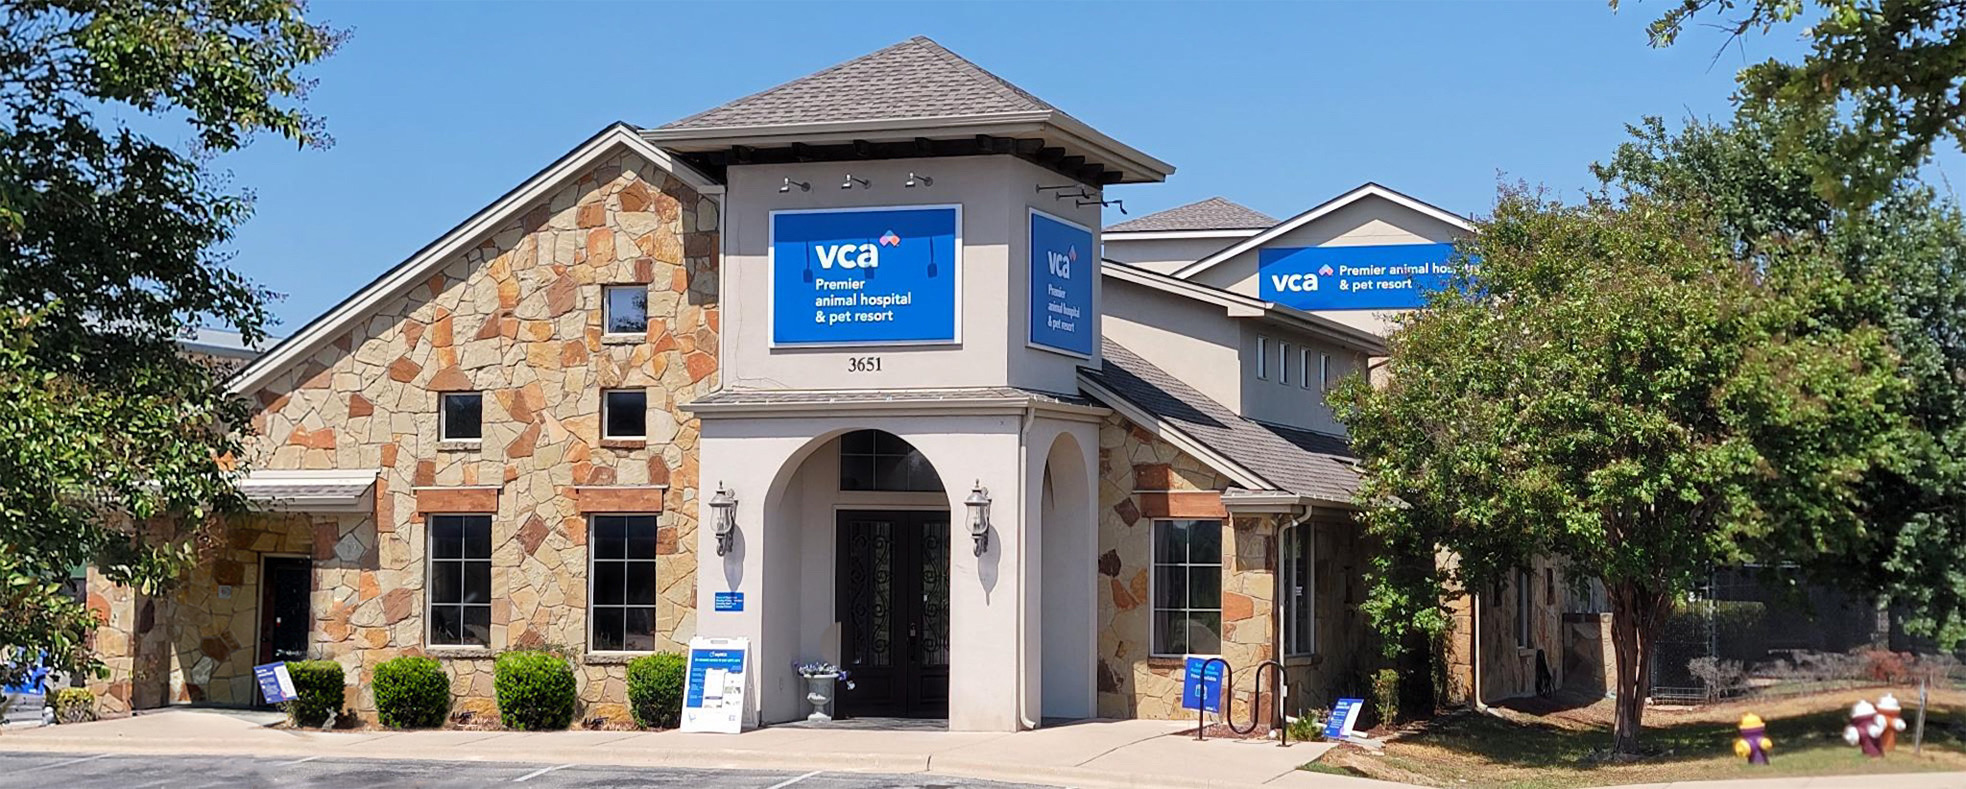 Welcome to VCA Premier Animal Hospital and Pet Resort!